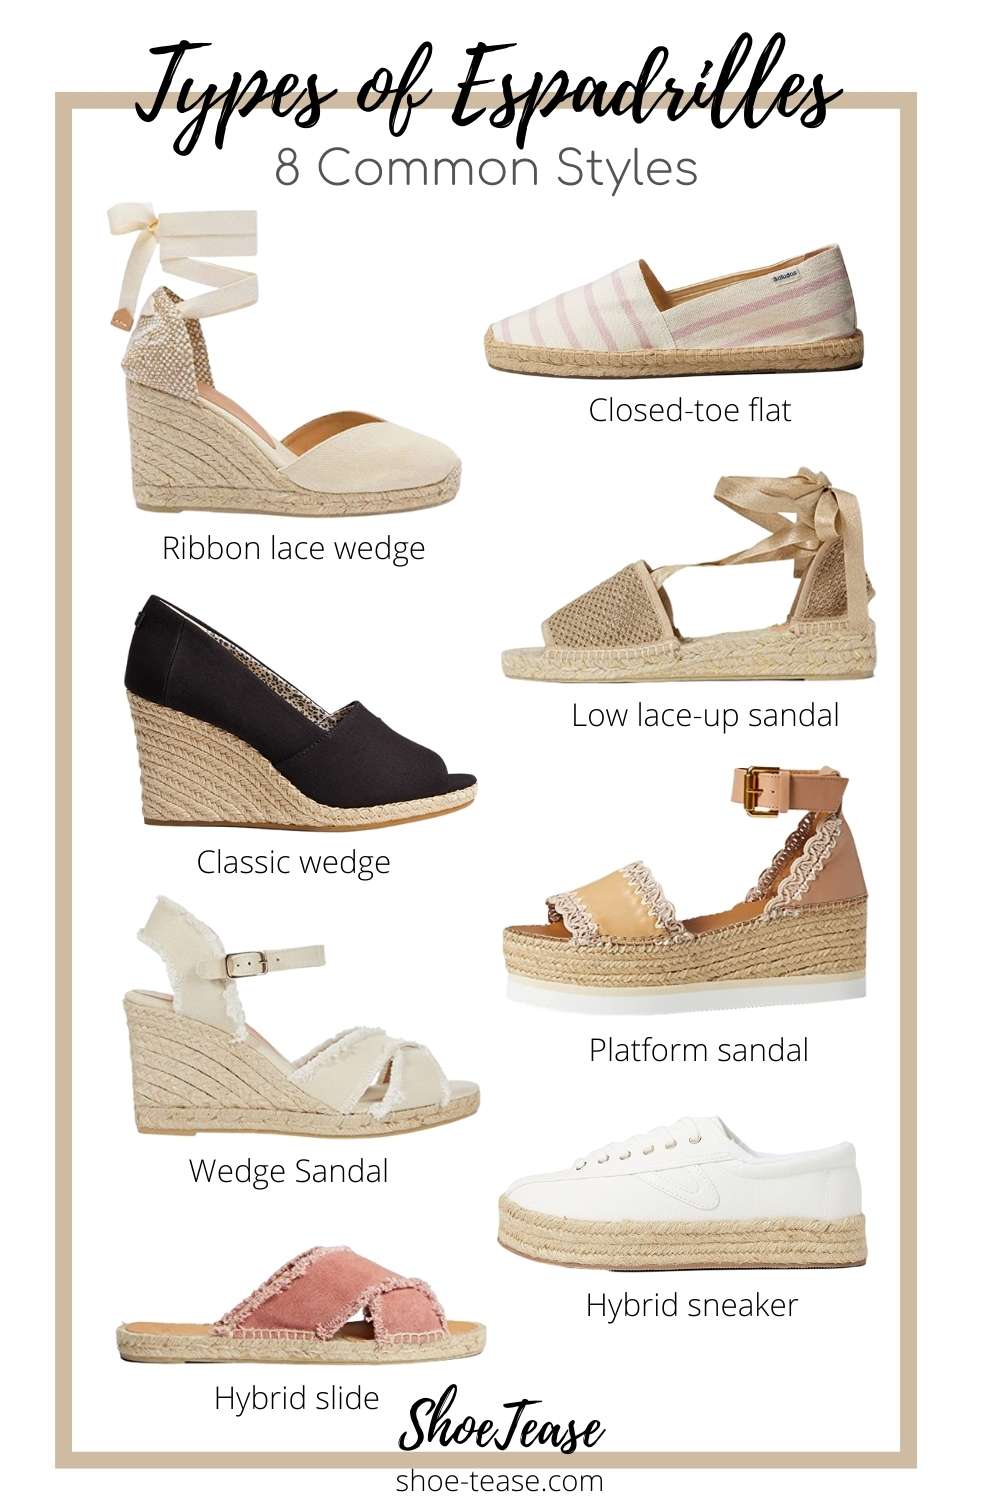 When to Wear Open-toed or Closed-toed Heels